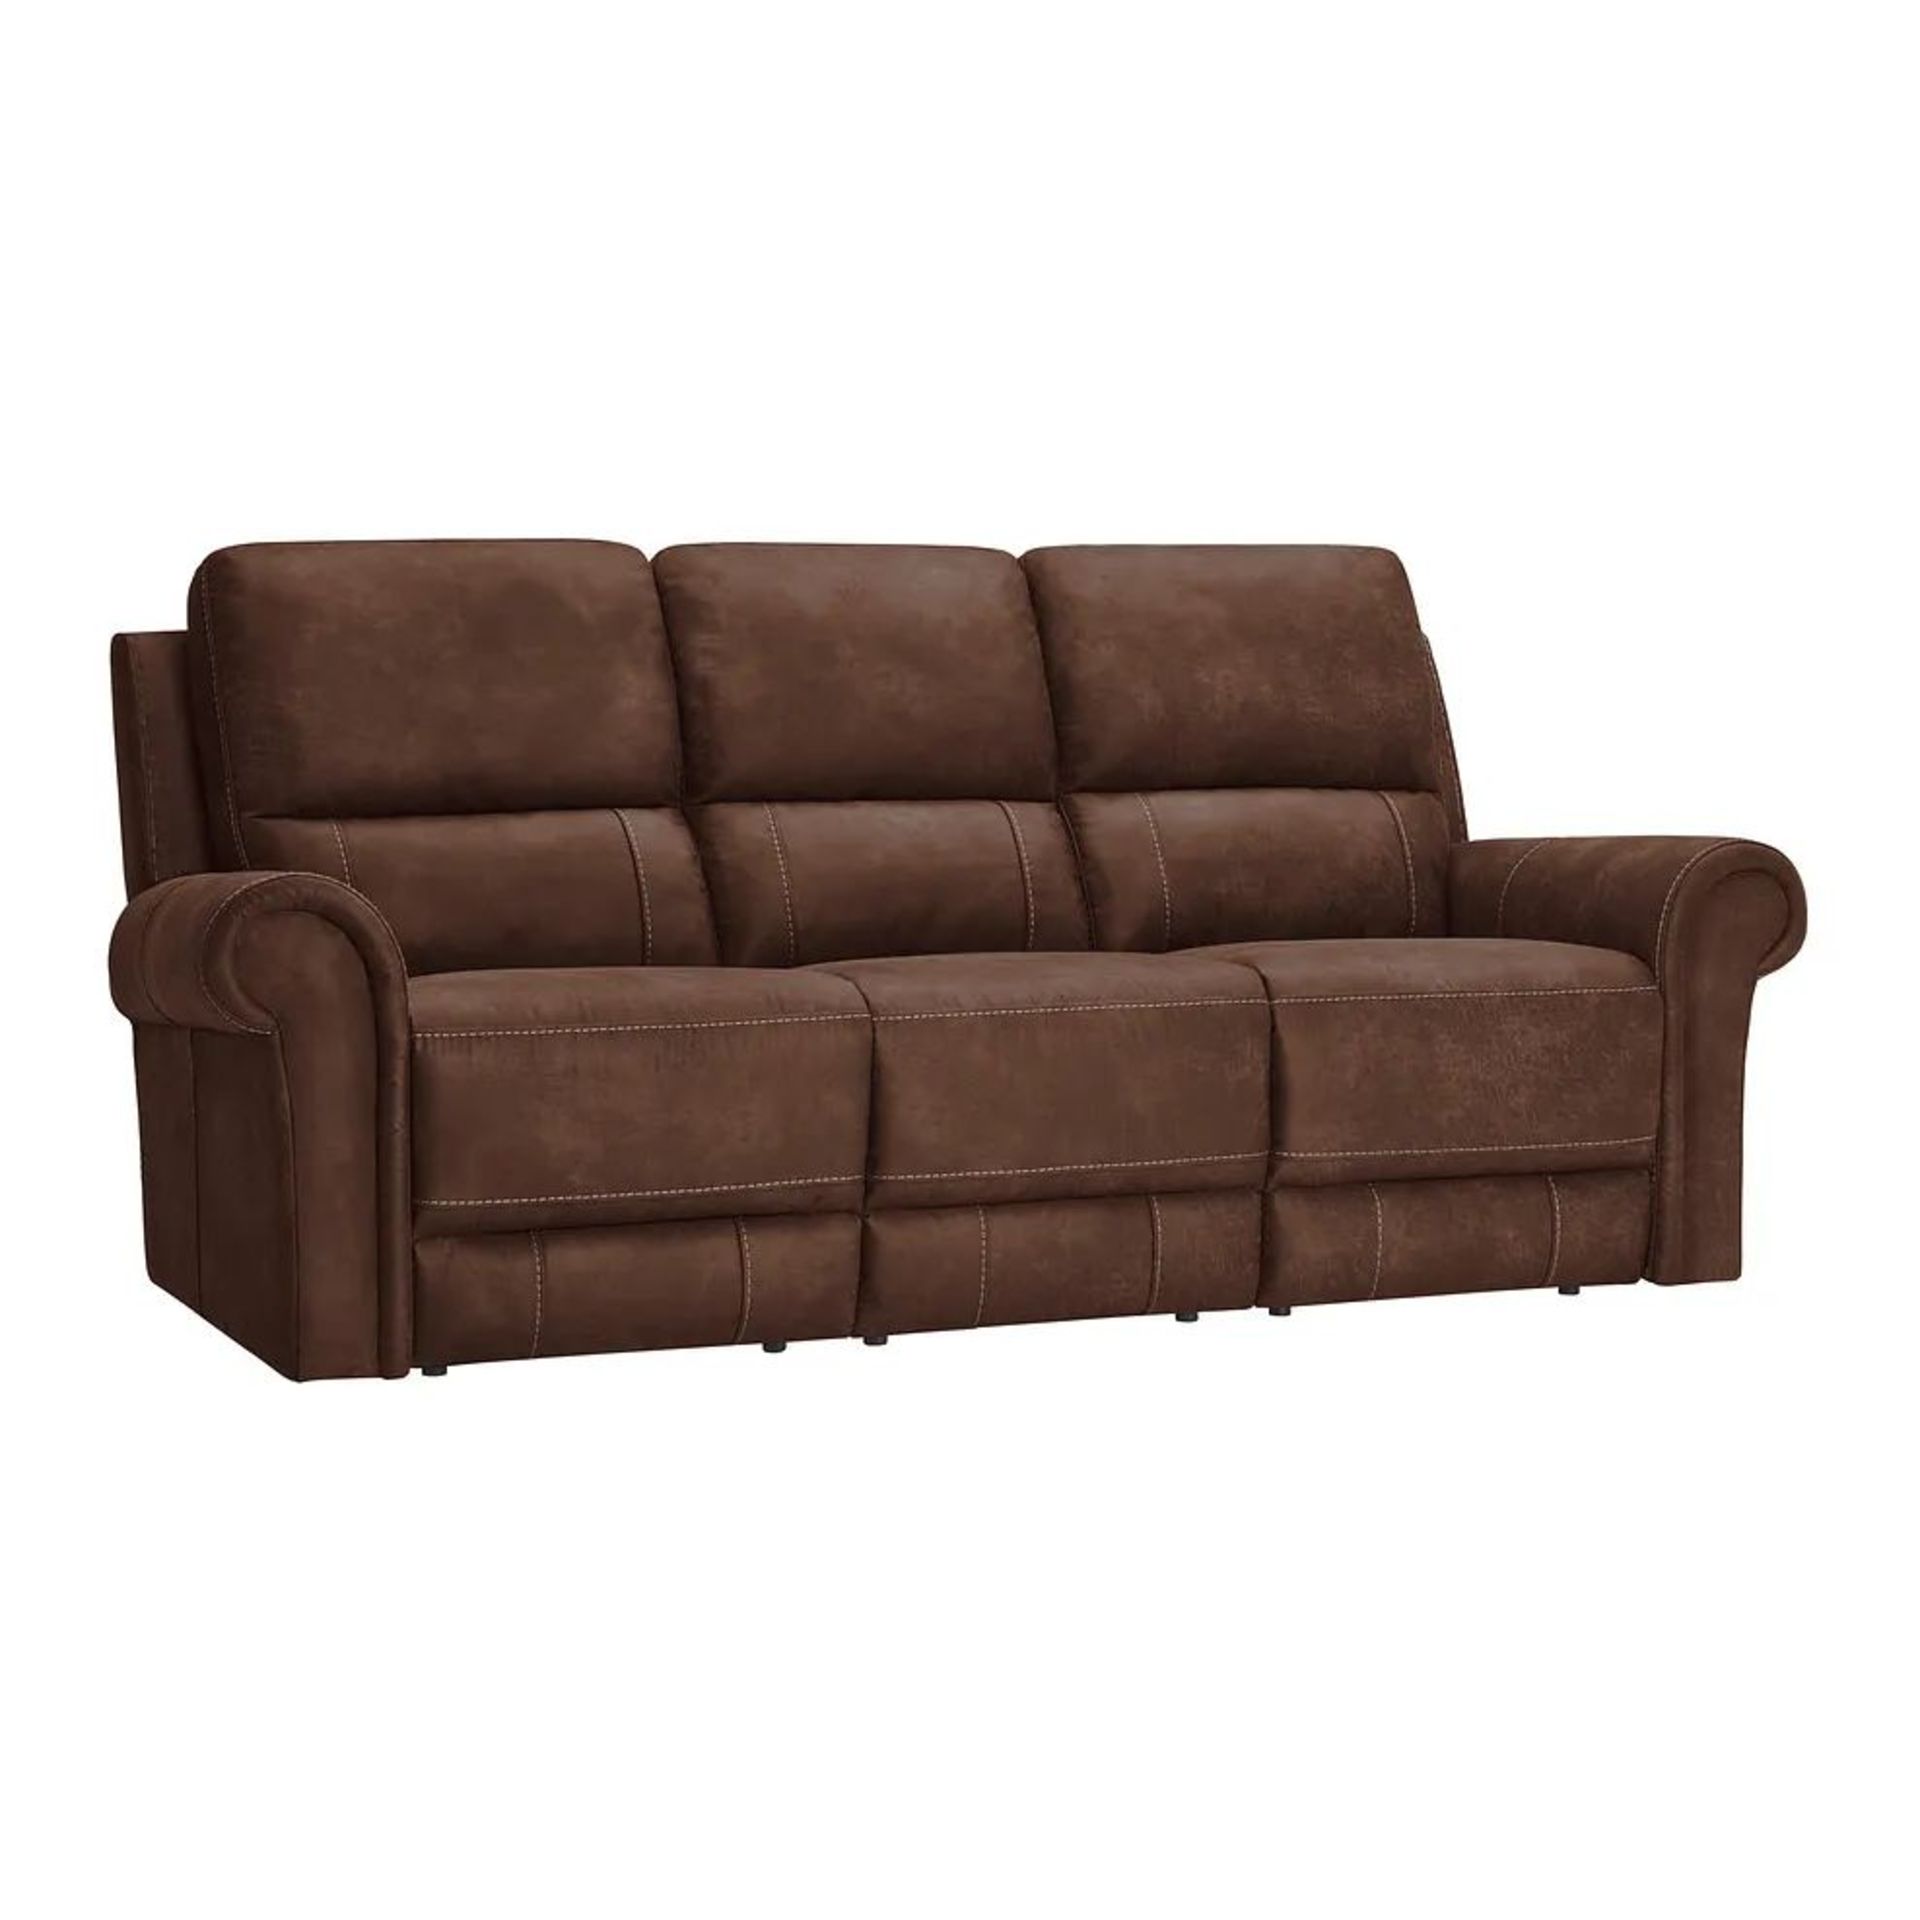 BRAND NEW COLORADO 3 Seater Sofa - DARK BROWN FABRIC. RRP £1099. Shown here in Ranch dark brown, our